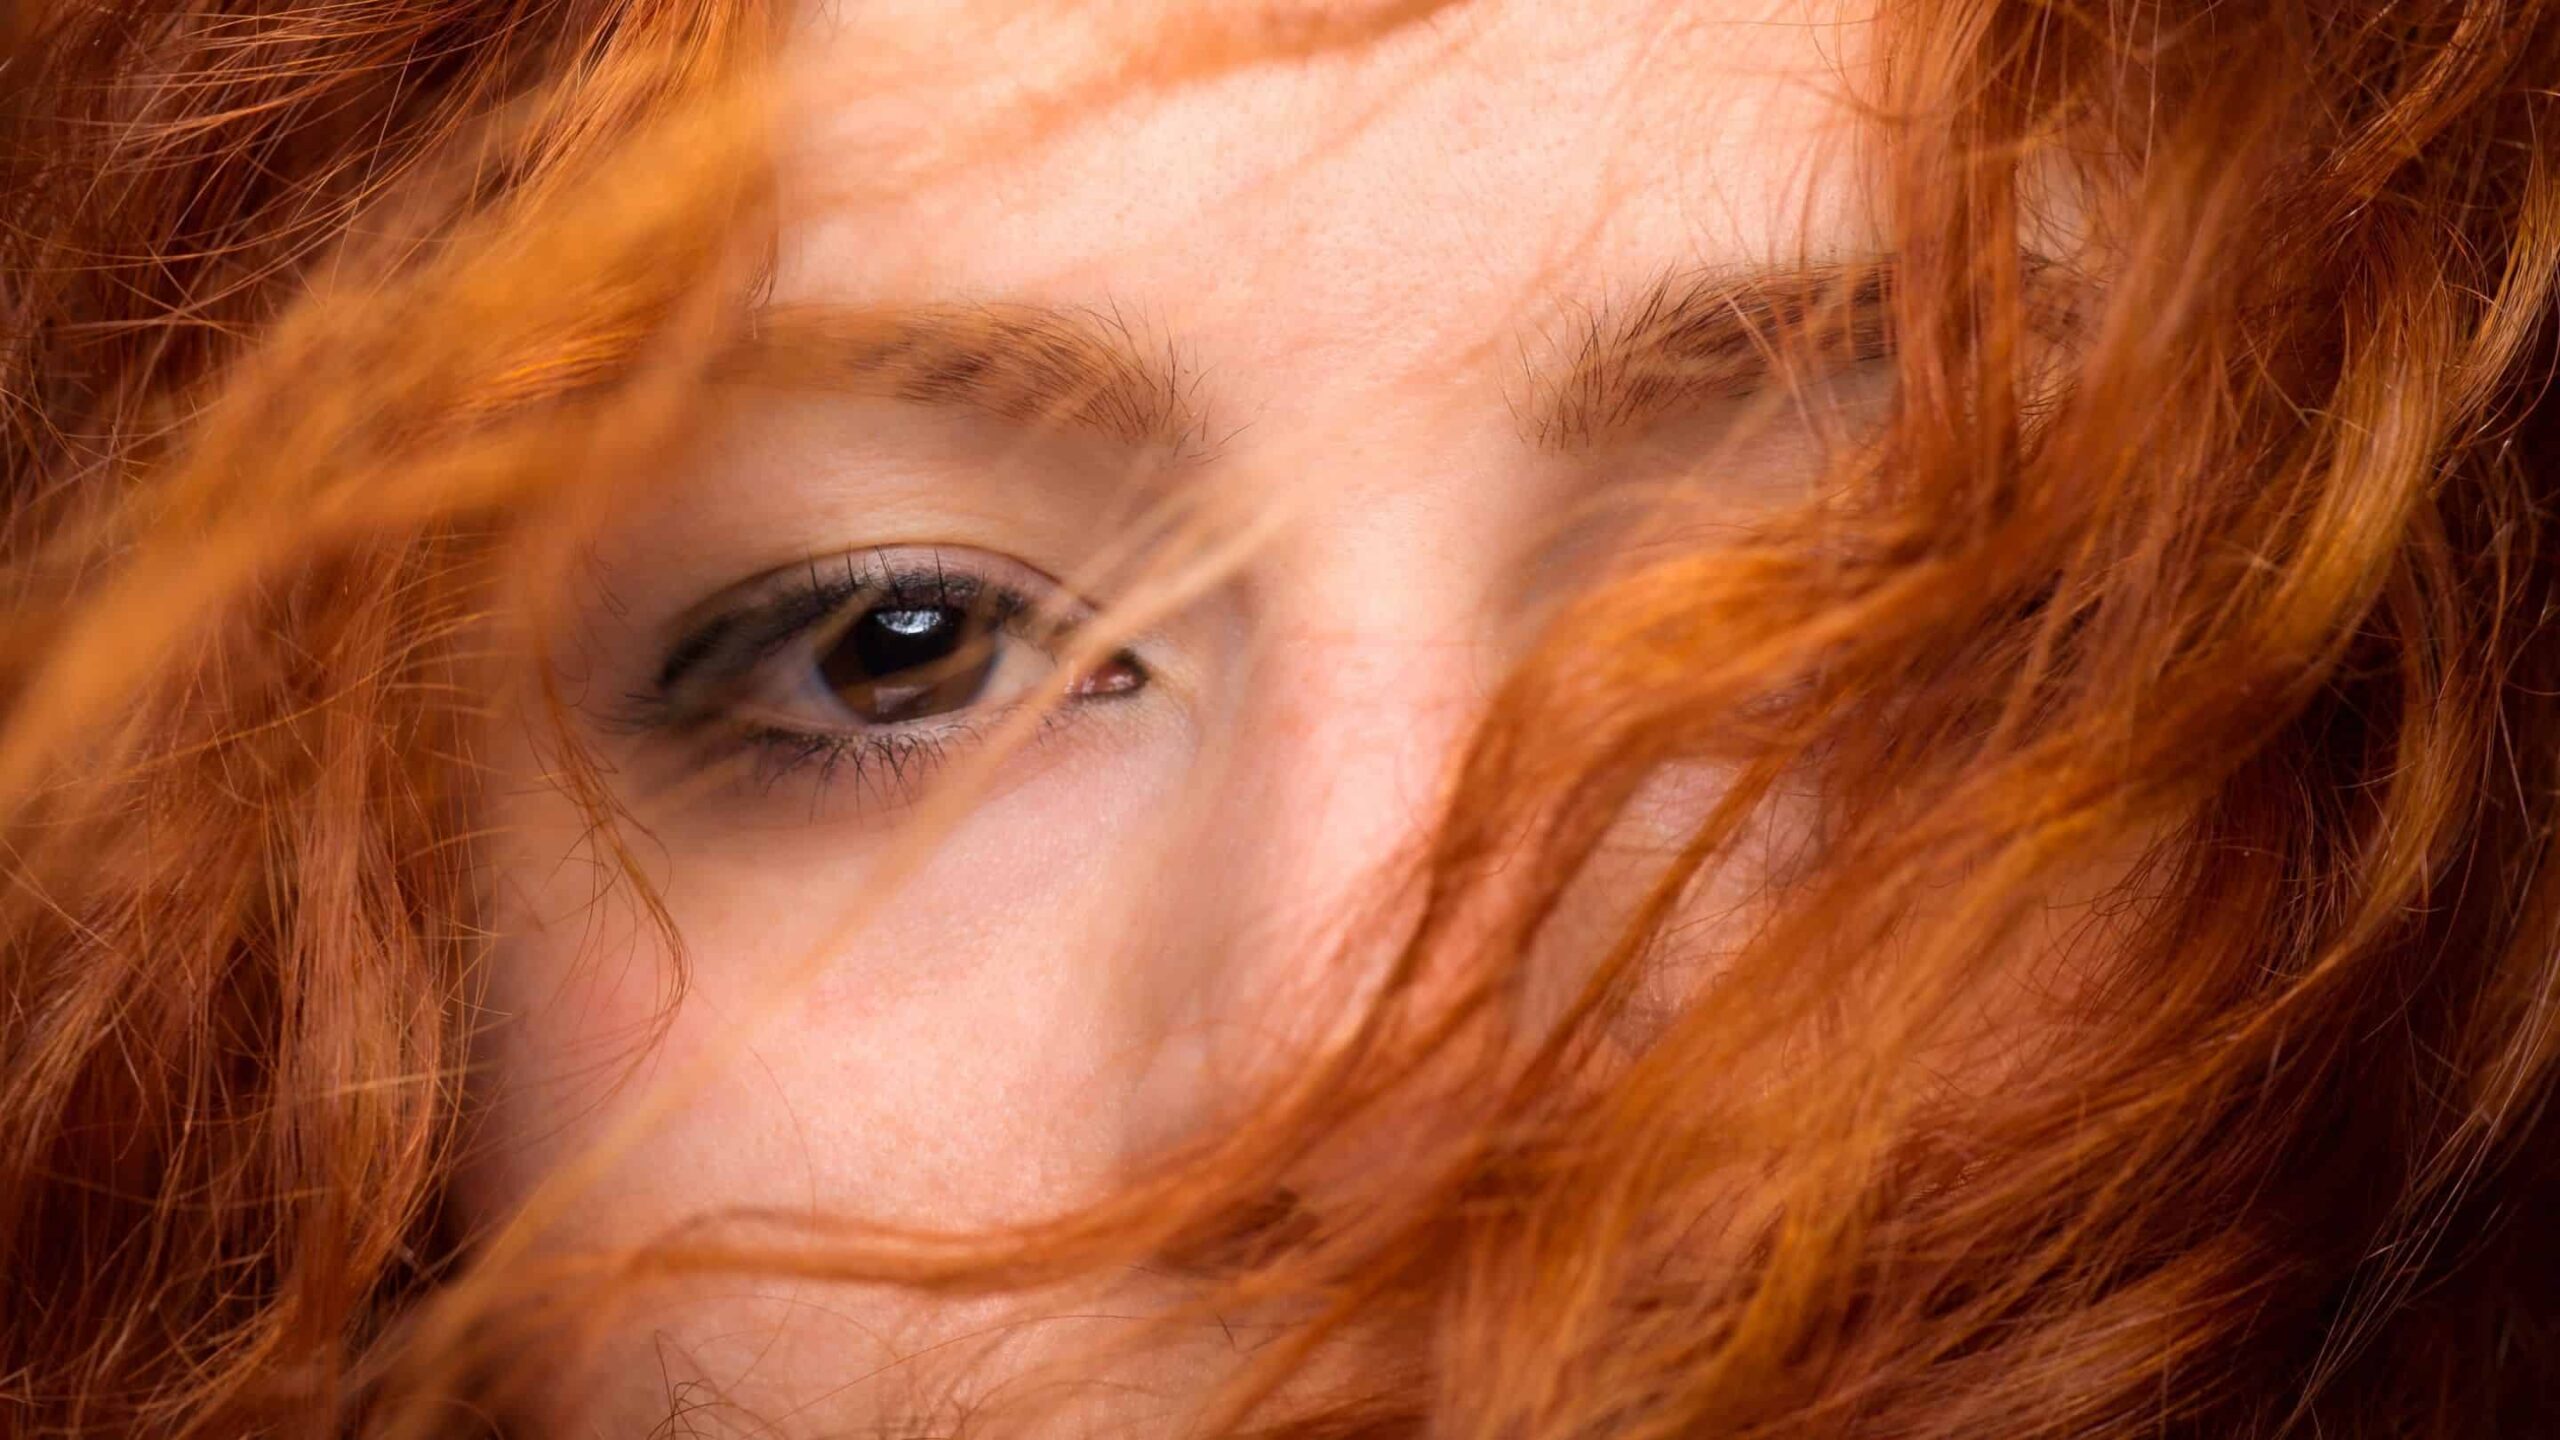 Redheads: Do You Have These Other Recessive Genes?